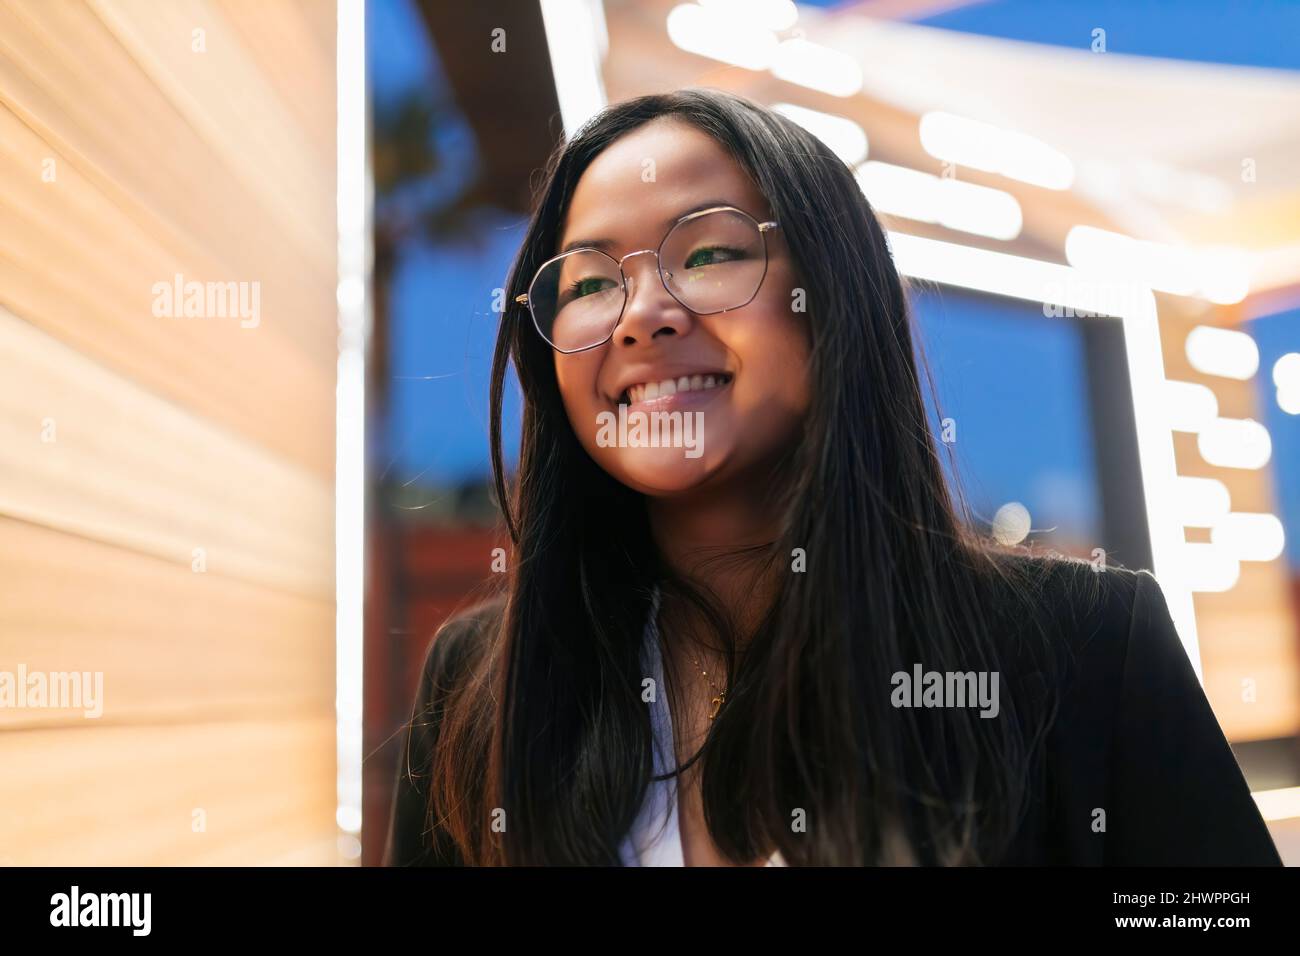 Smiling young businesswoman with eyeglasses and long black hair Stock Photo